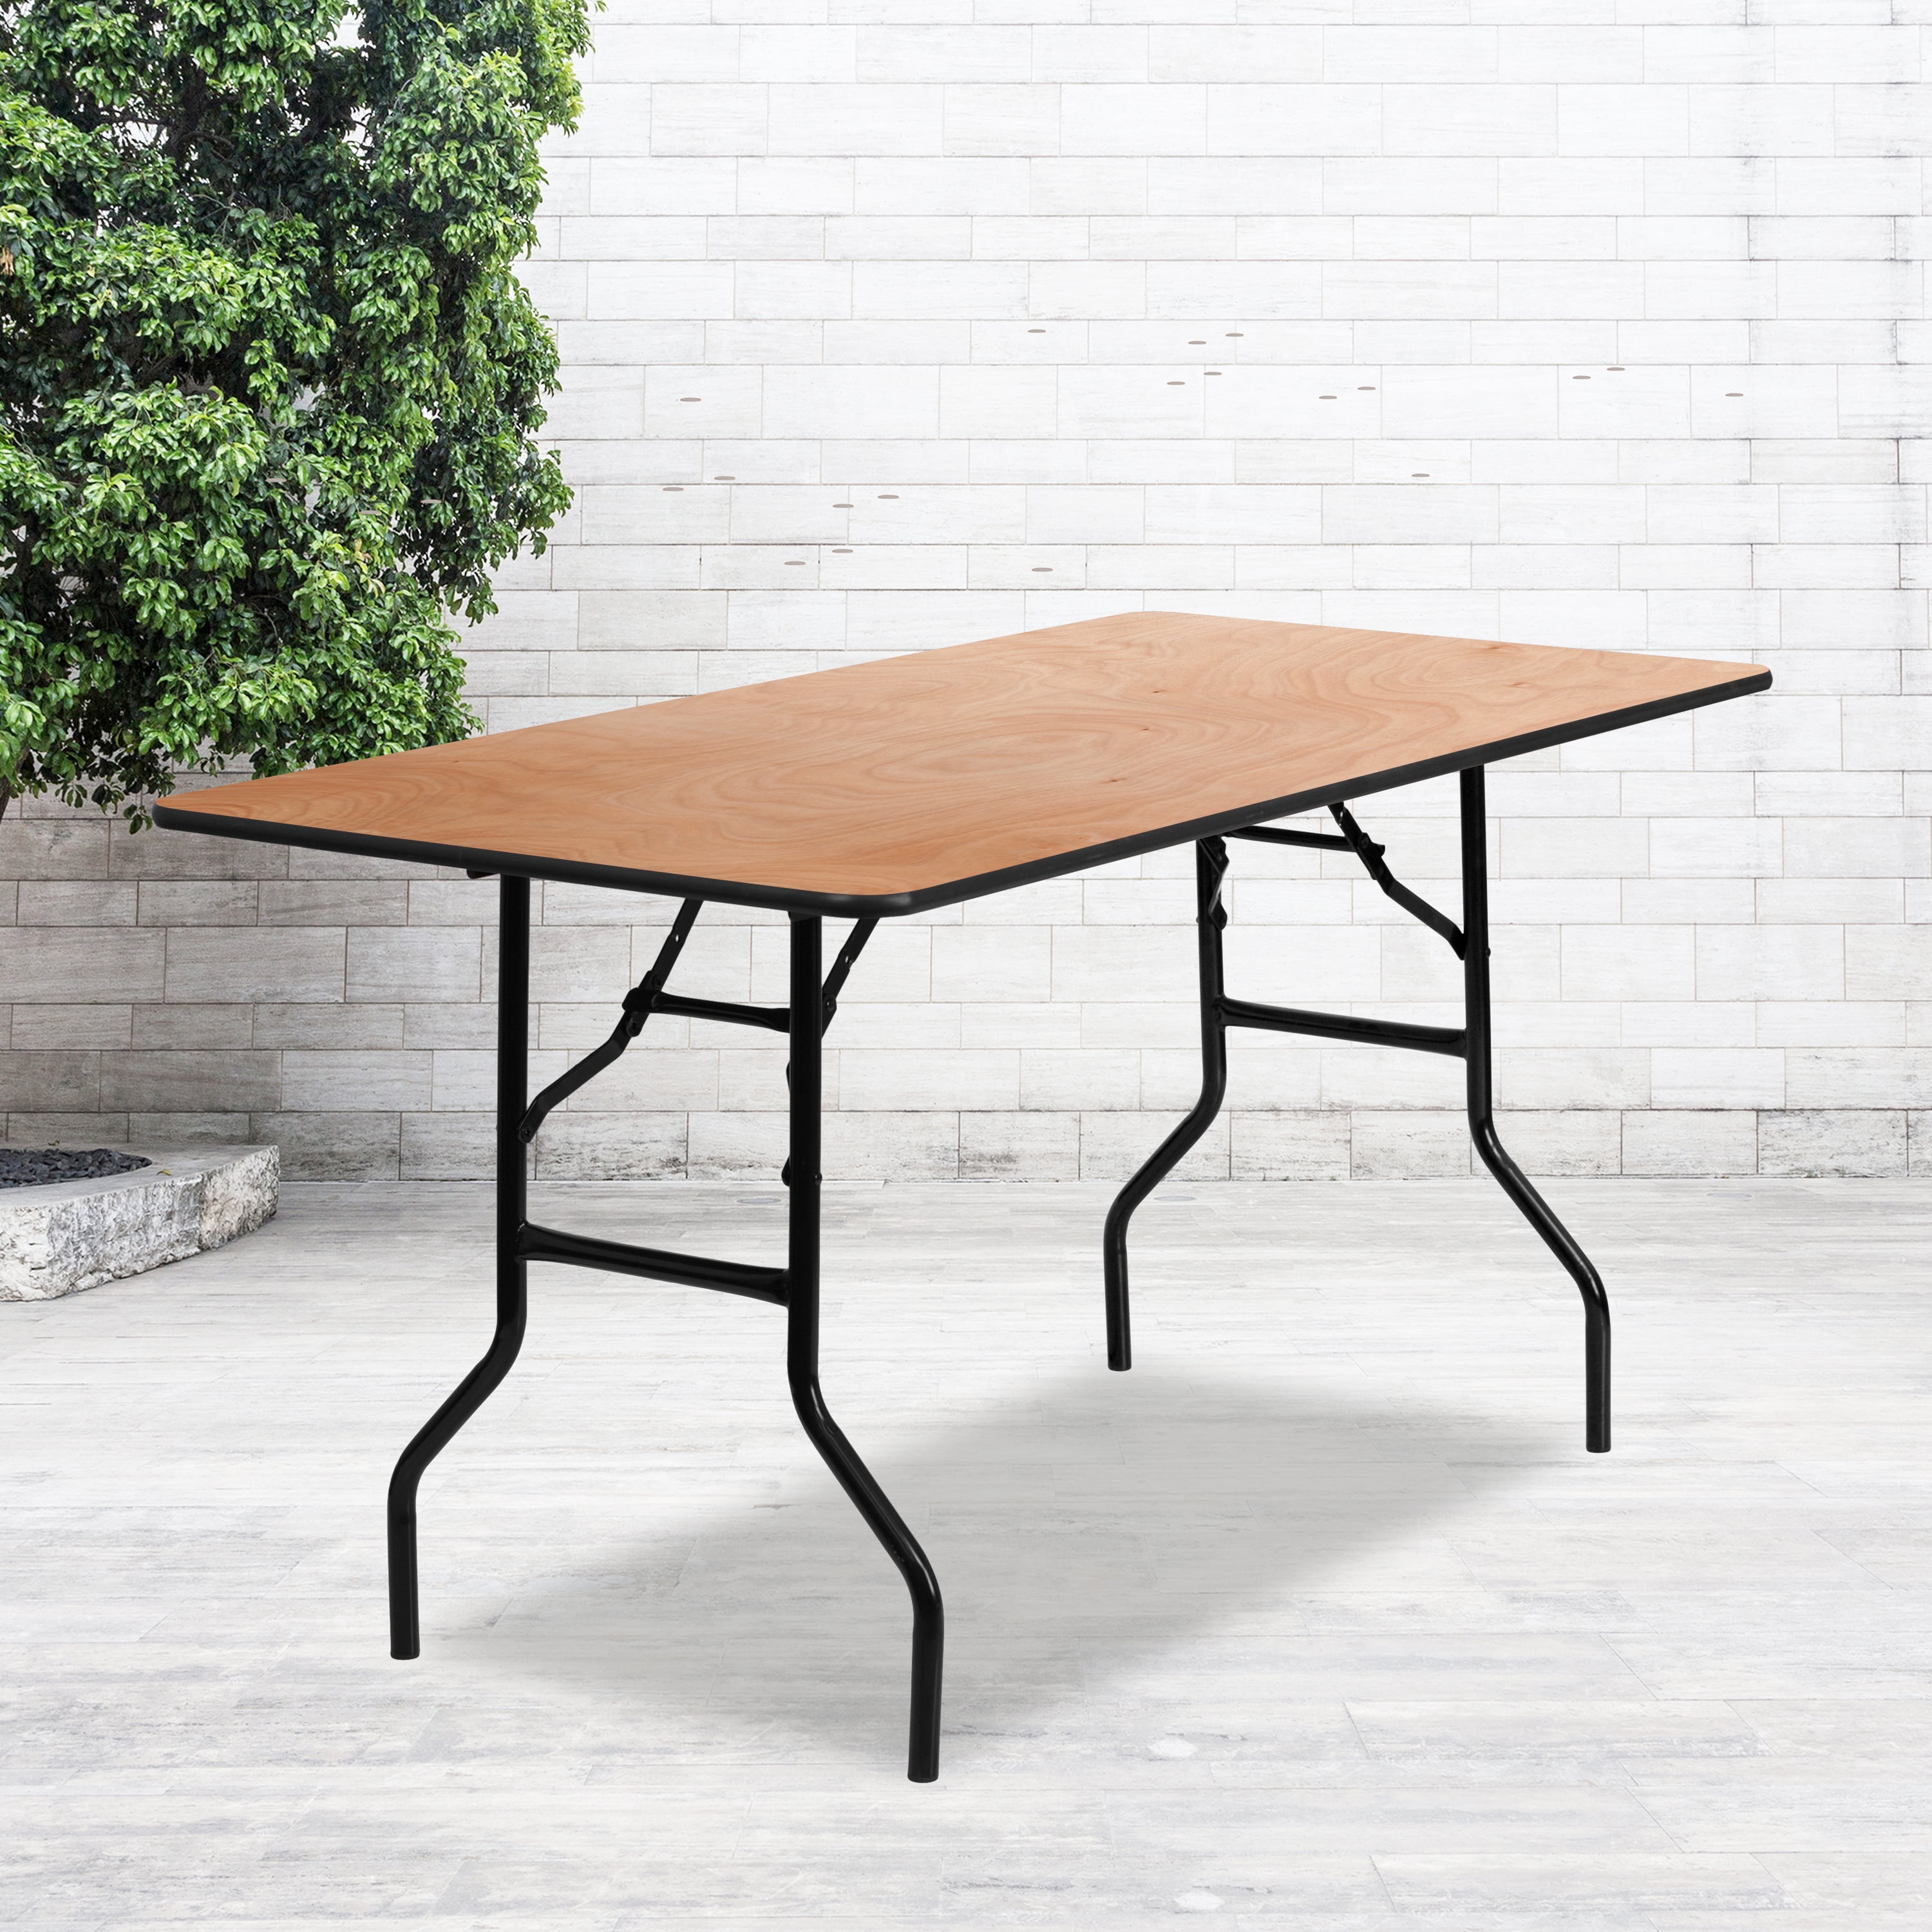 Folding conference tables